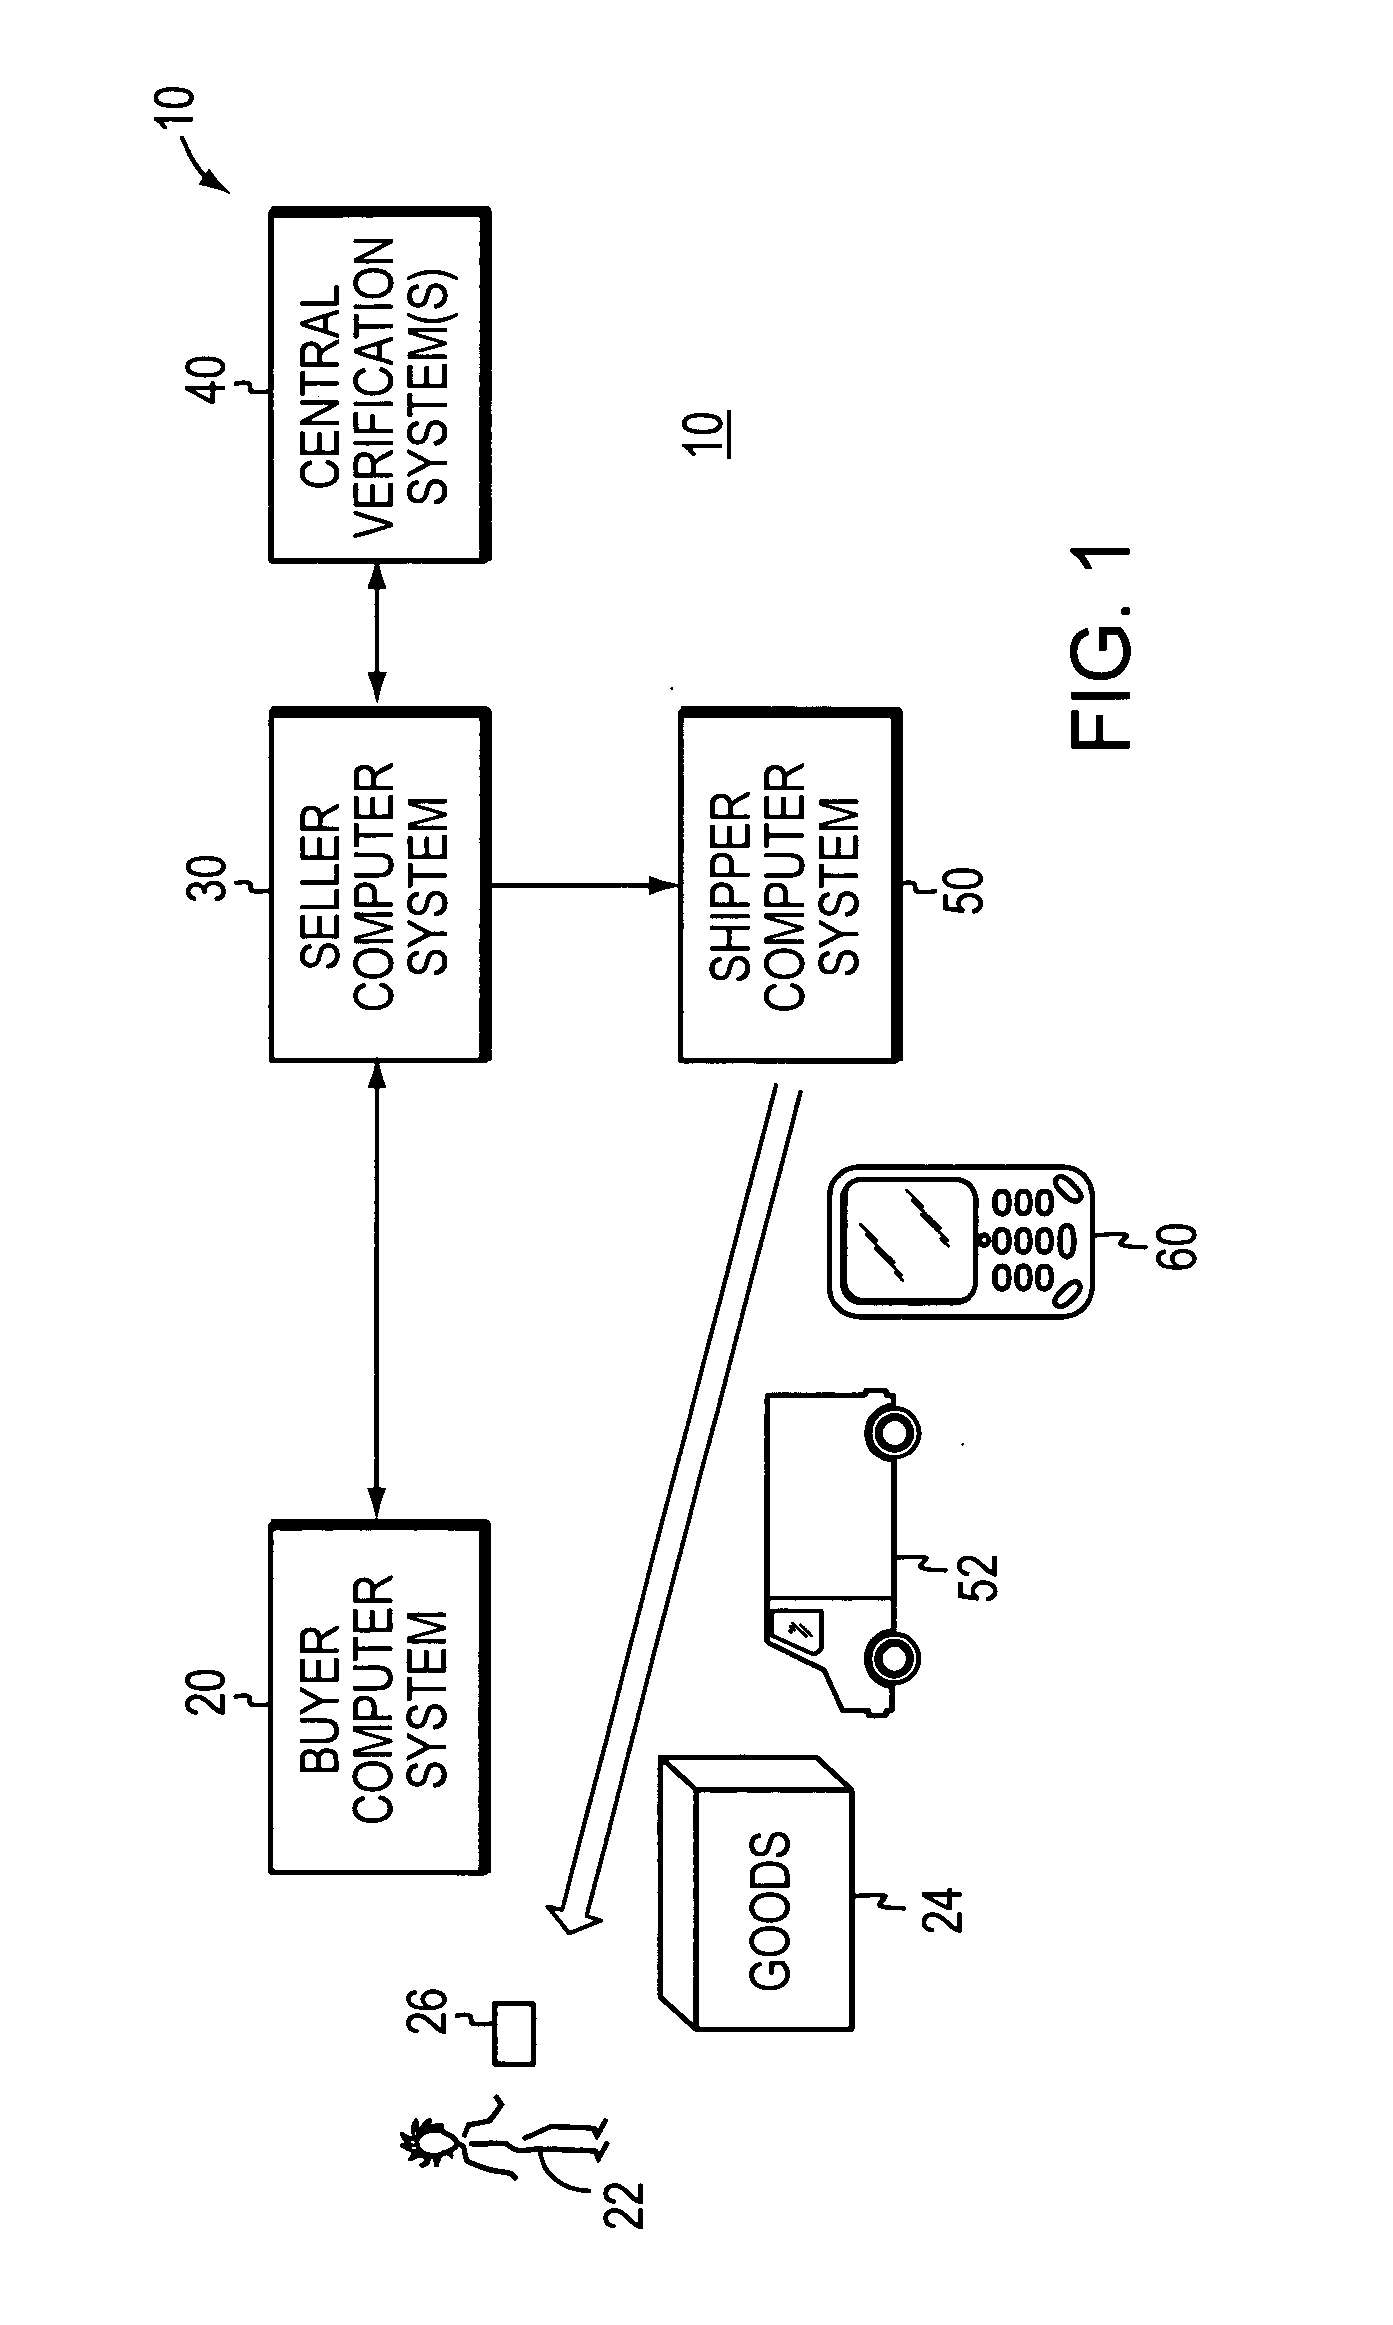 Delivery systems and methods involving verification of a payment card from a handheld device